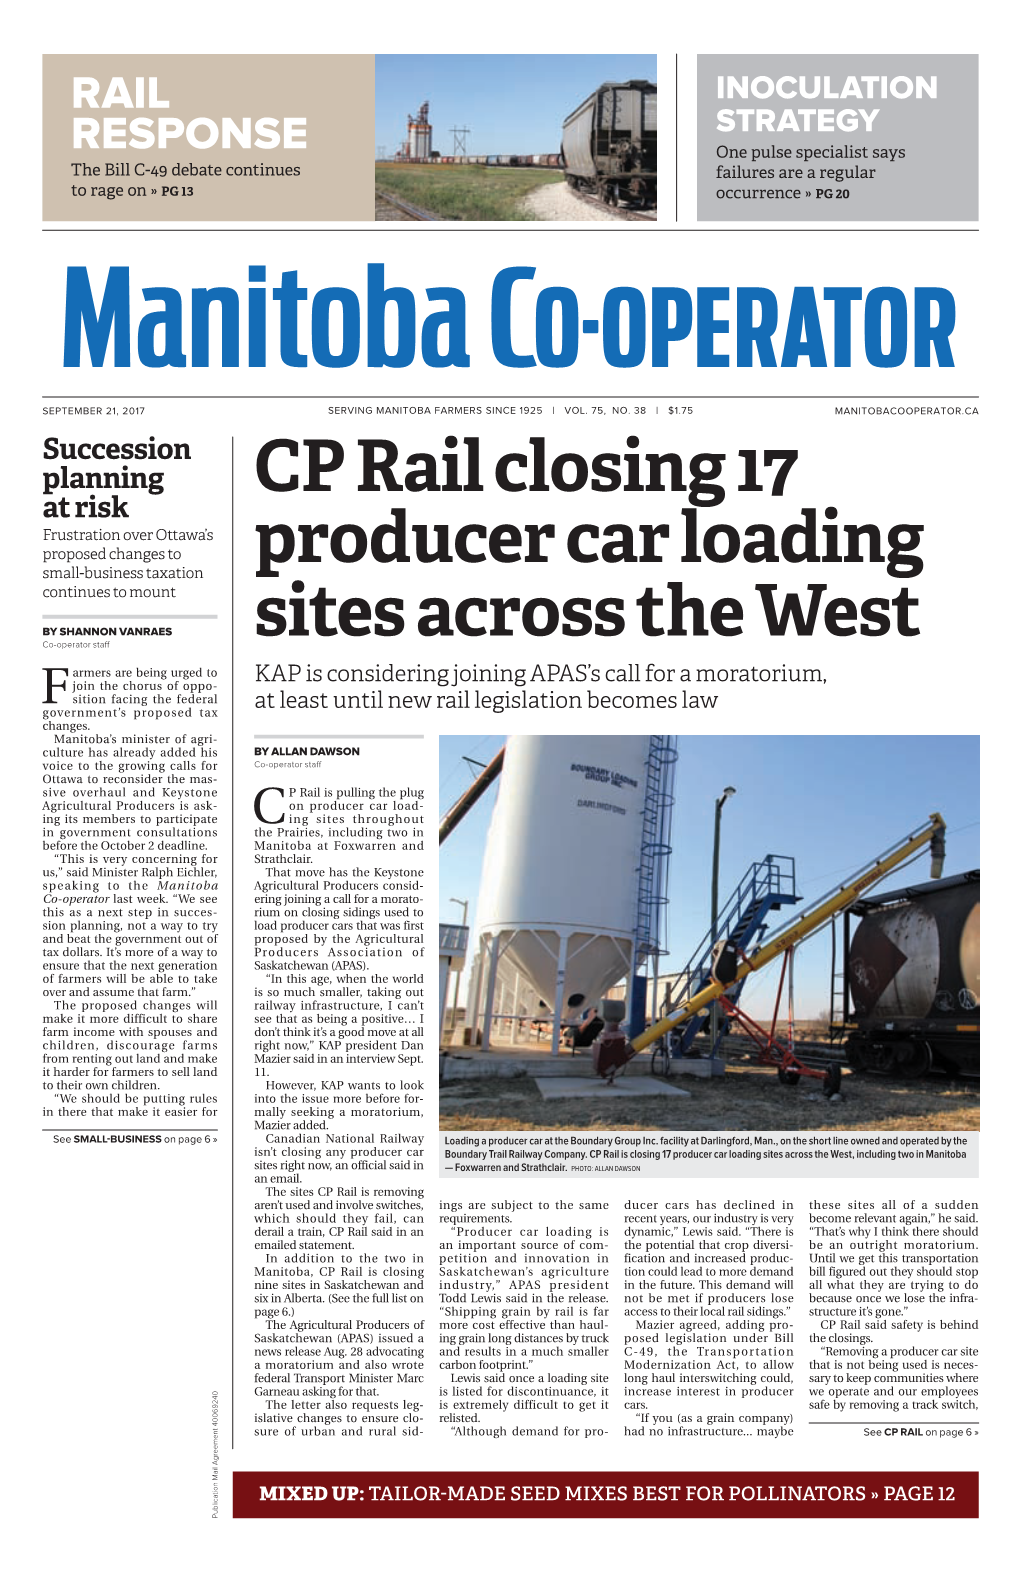 CP Rail Closing 17 Producer Car Loading Sites Across the West